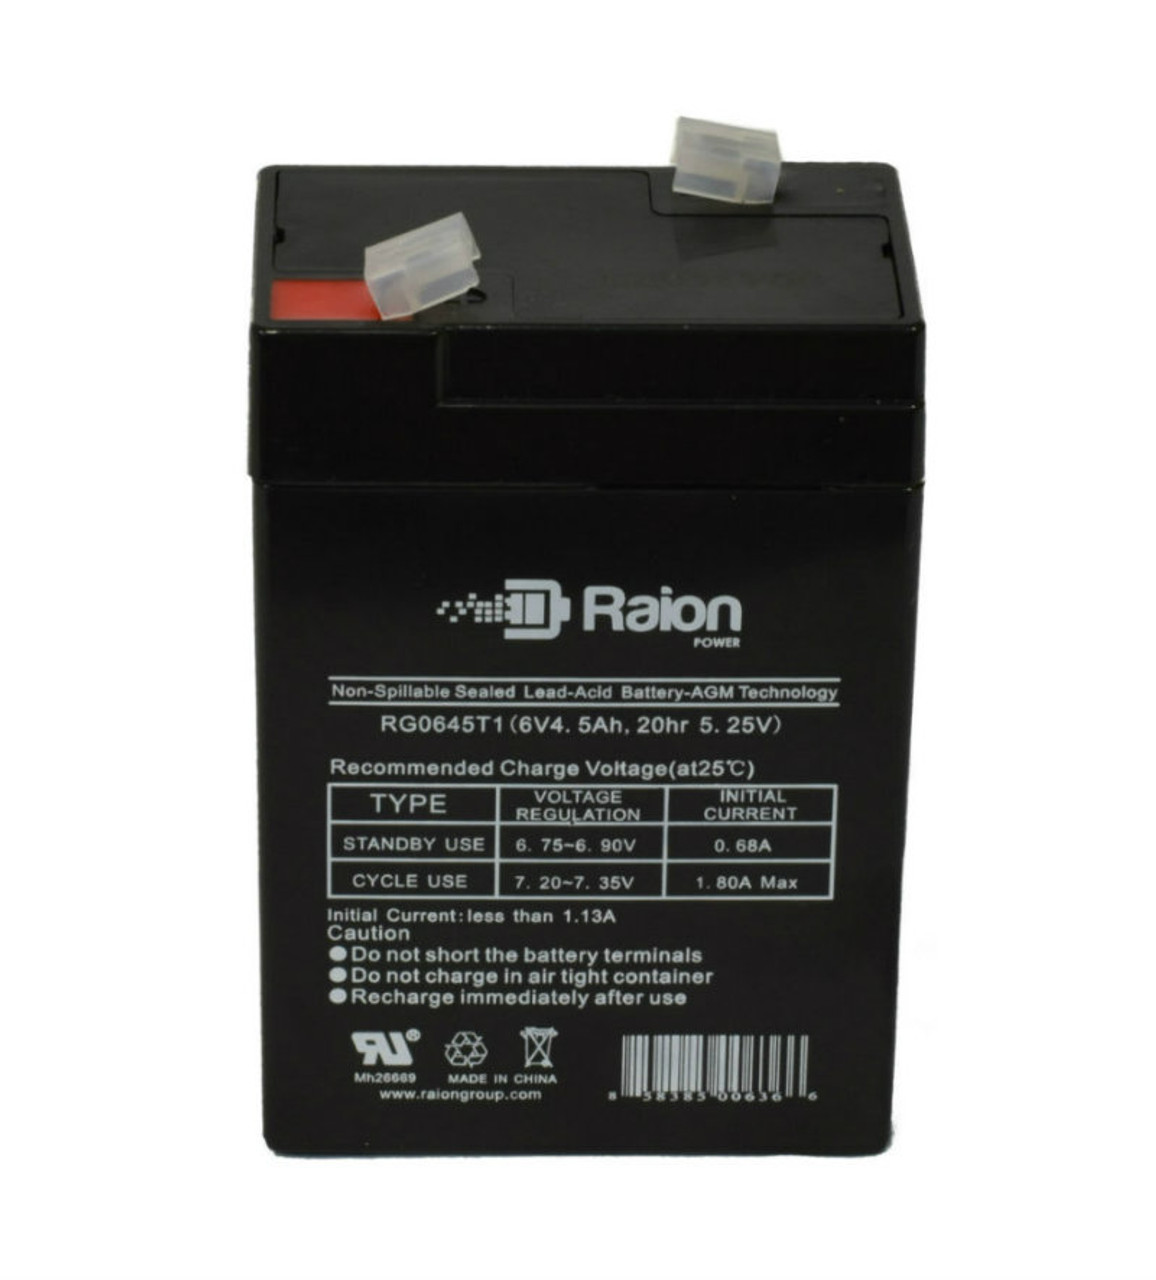 Raion Power RG0645T1 Replacement Battery Cartridge for LONG WP4-6V0